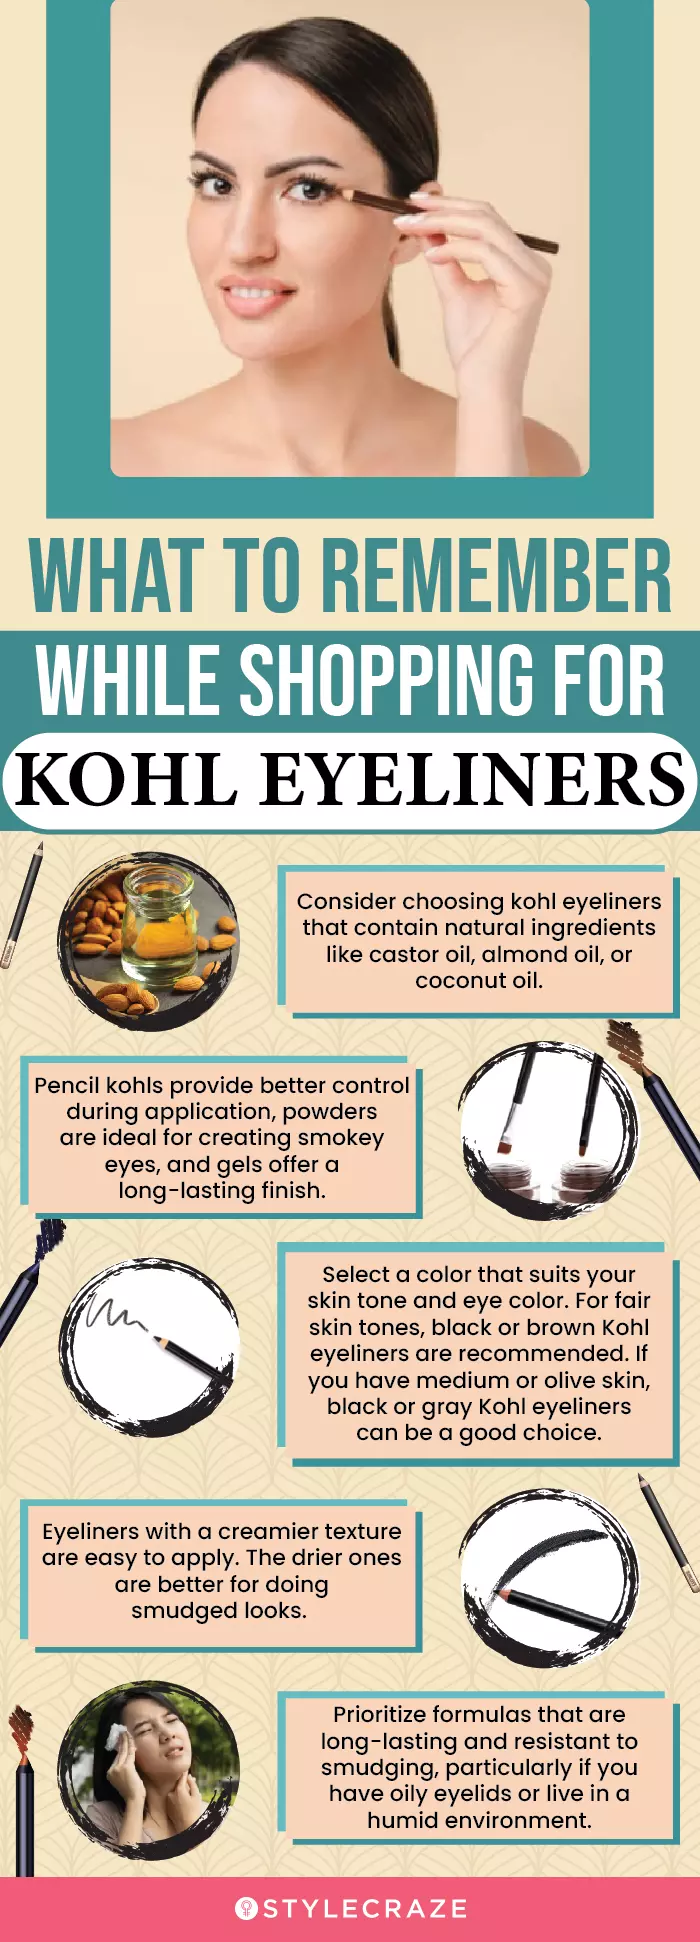 What To Remember While Shopping For Kohl Eyeliners (infographic)